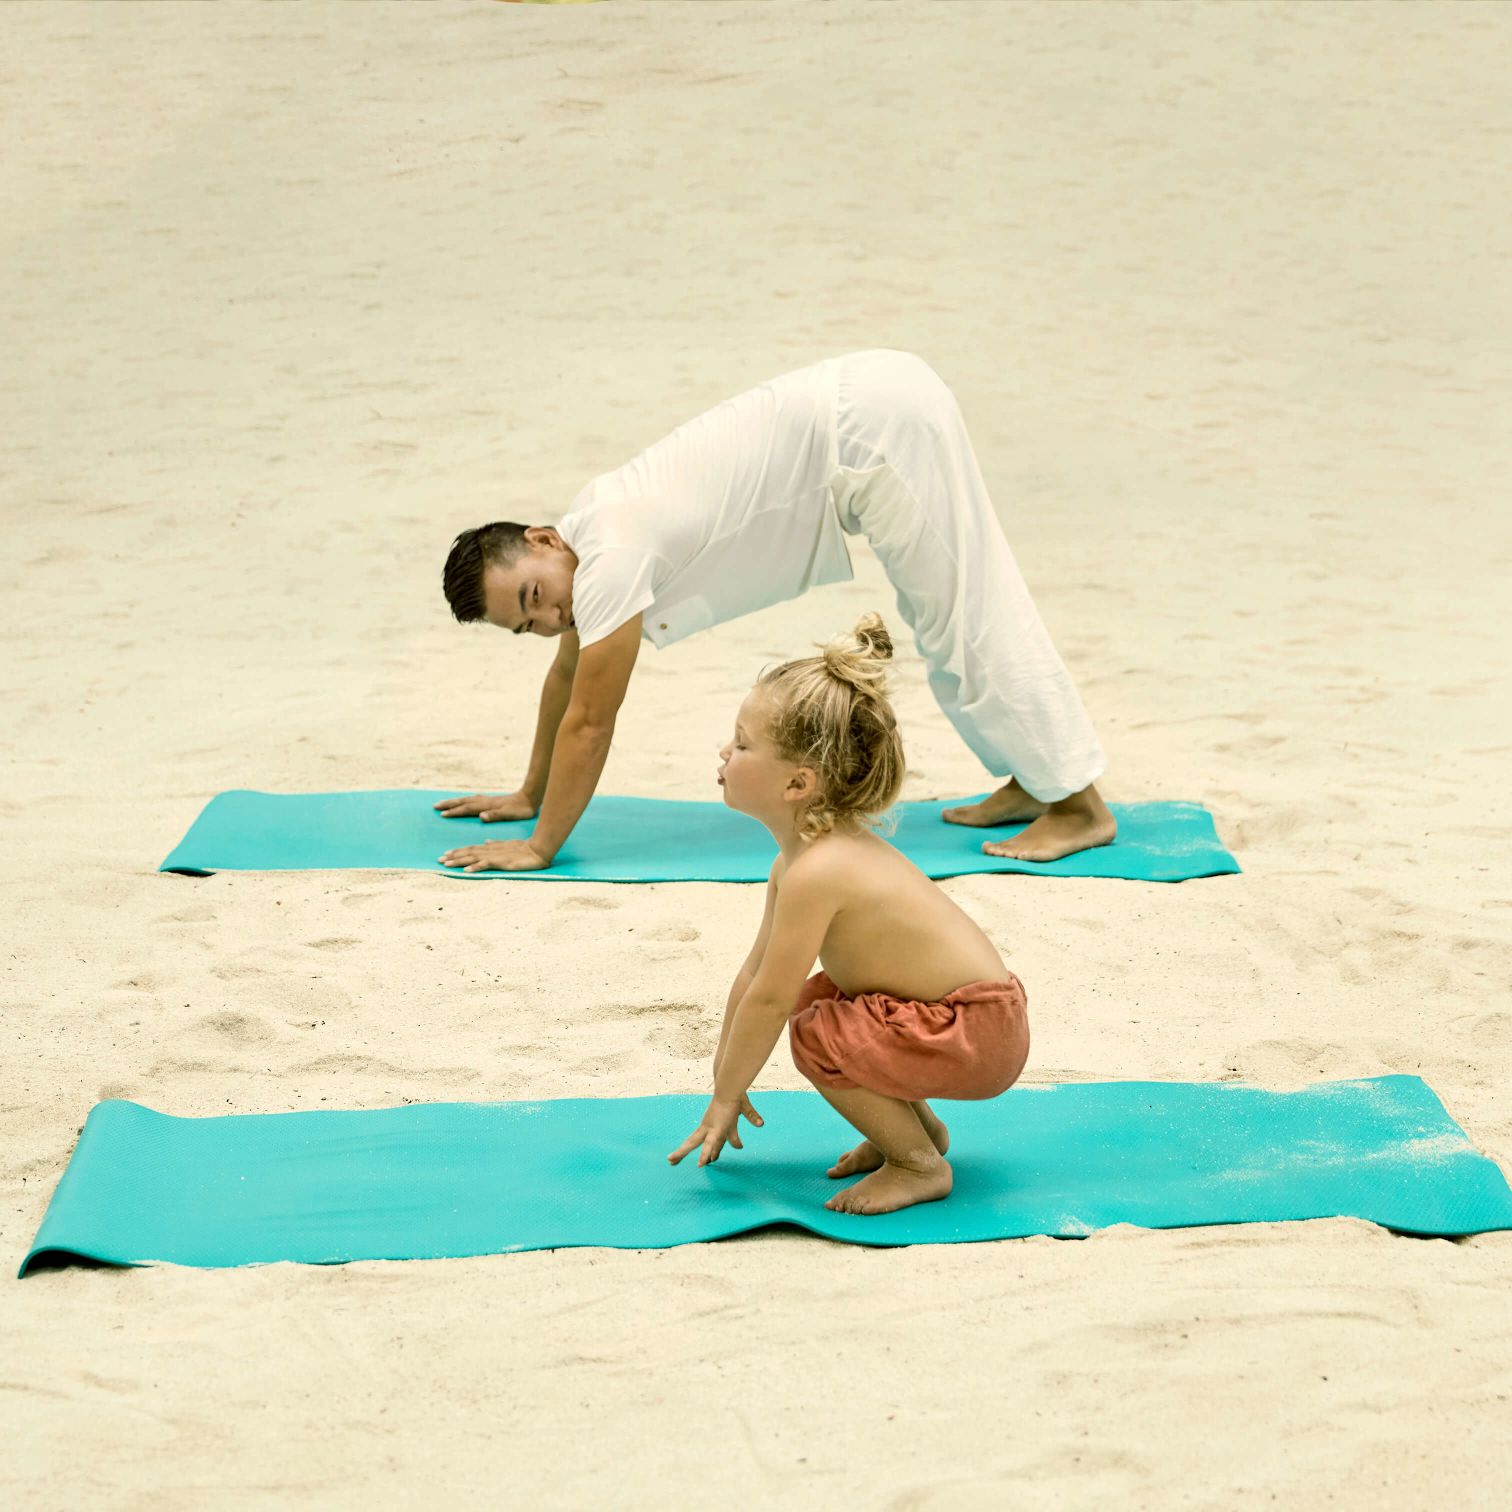 A Person And A Boy On A Mat On A Beach